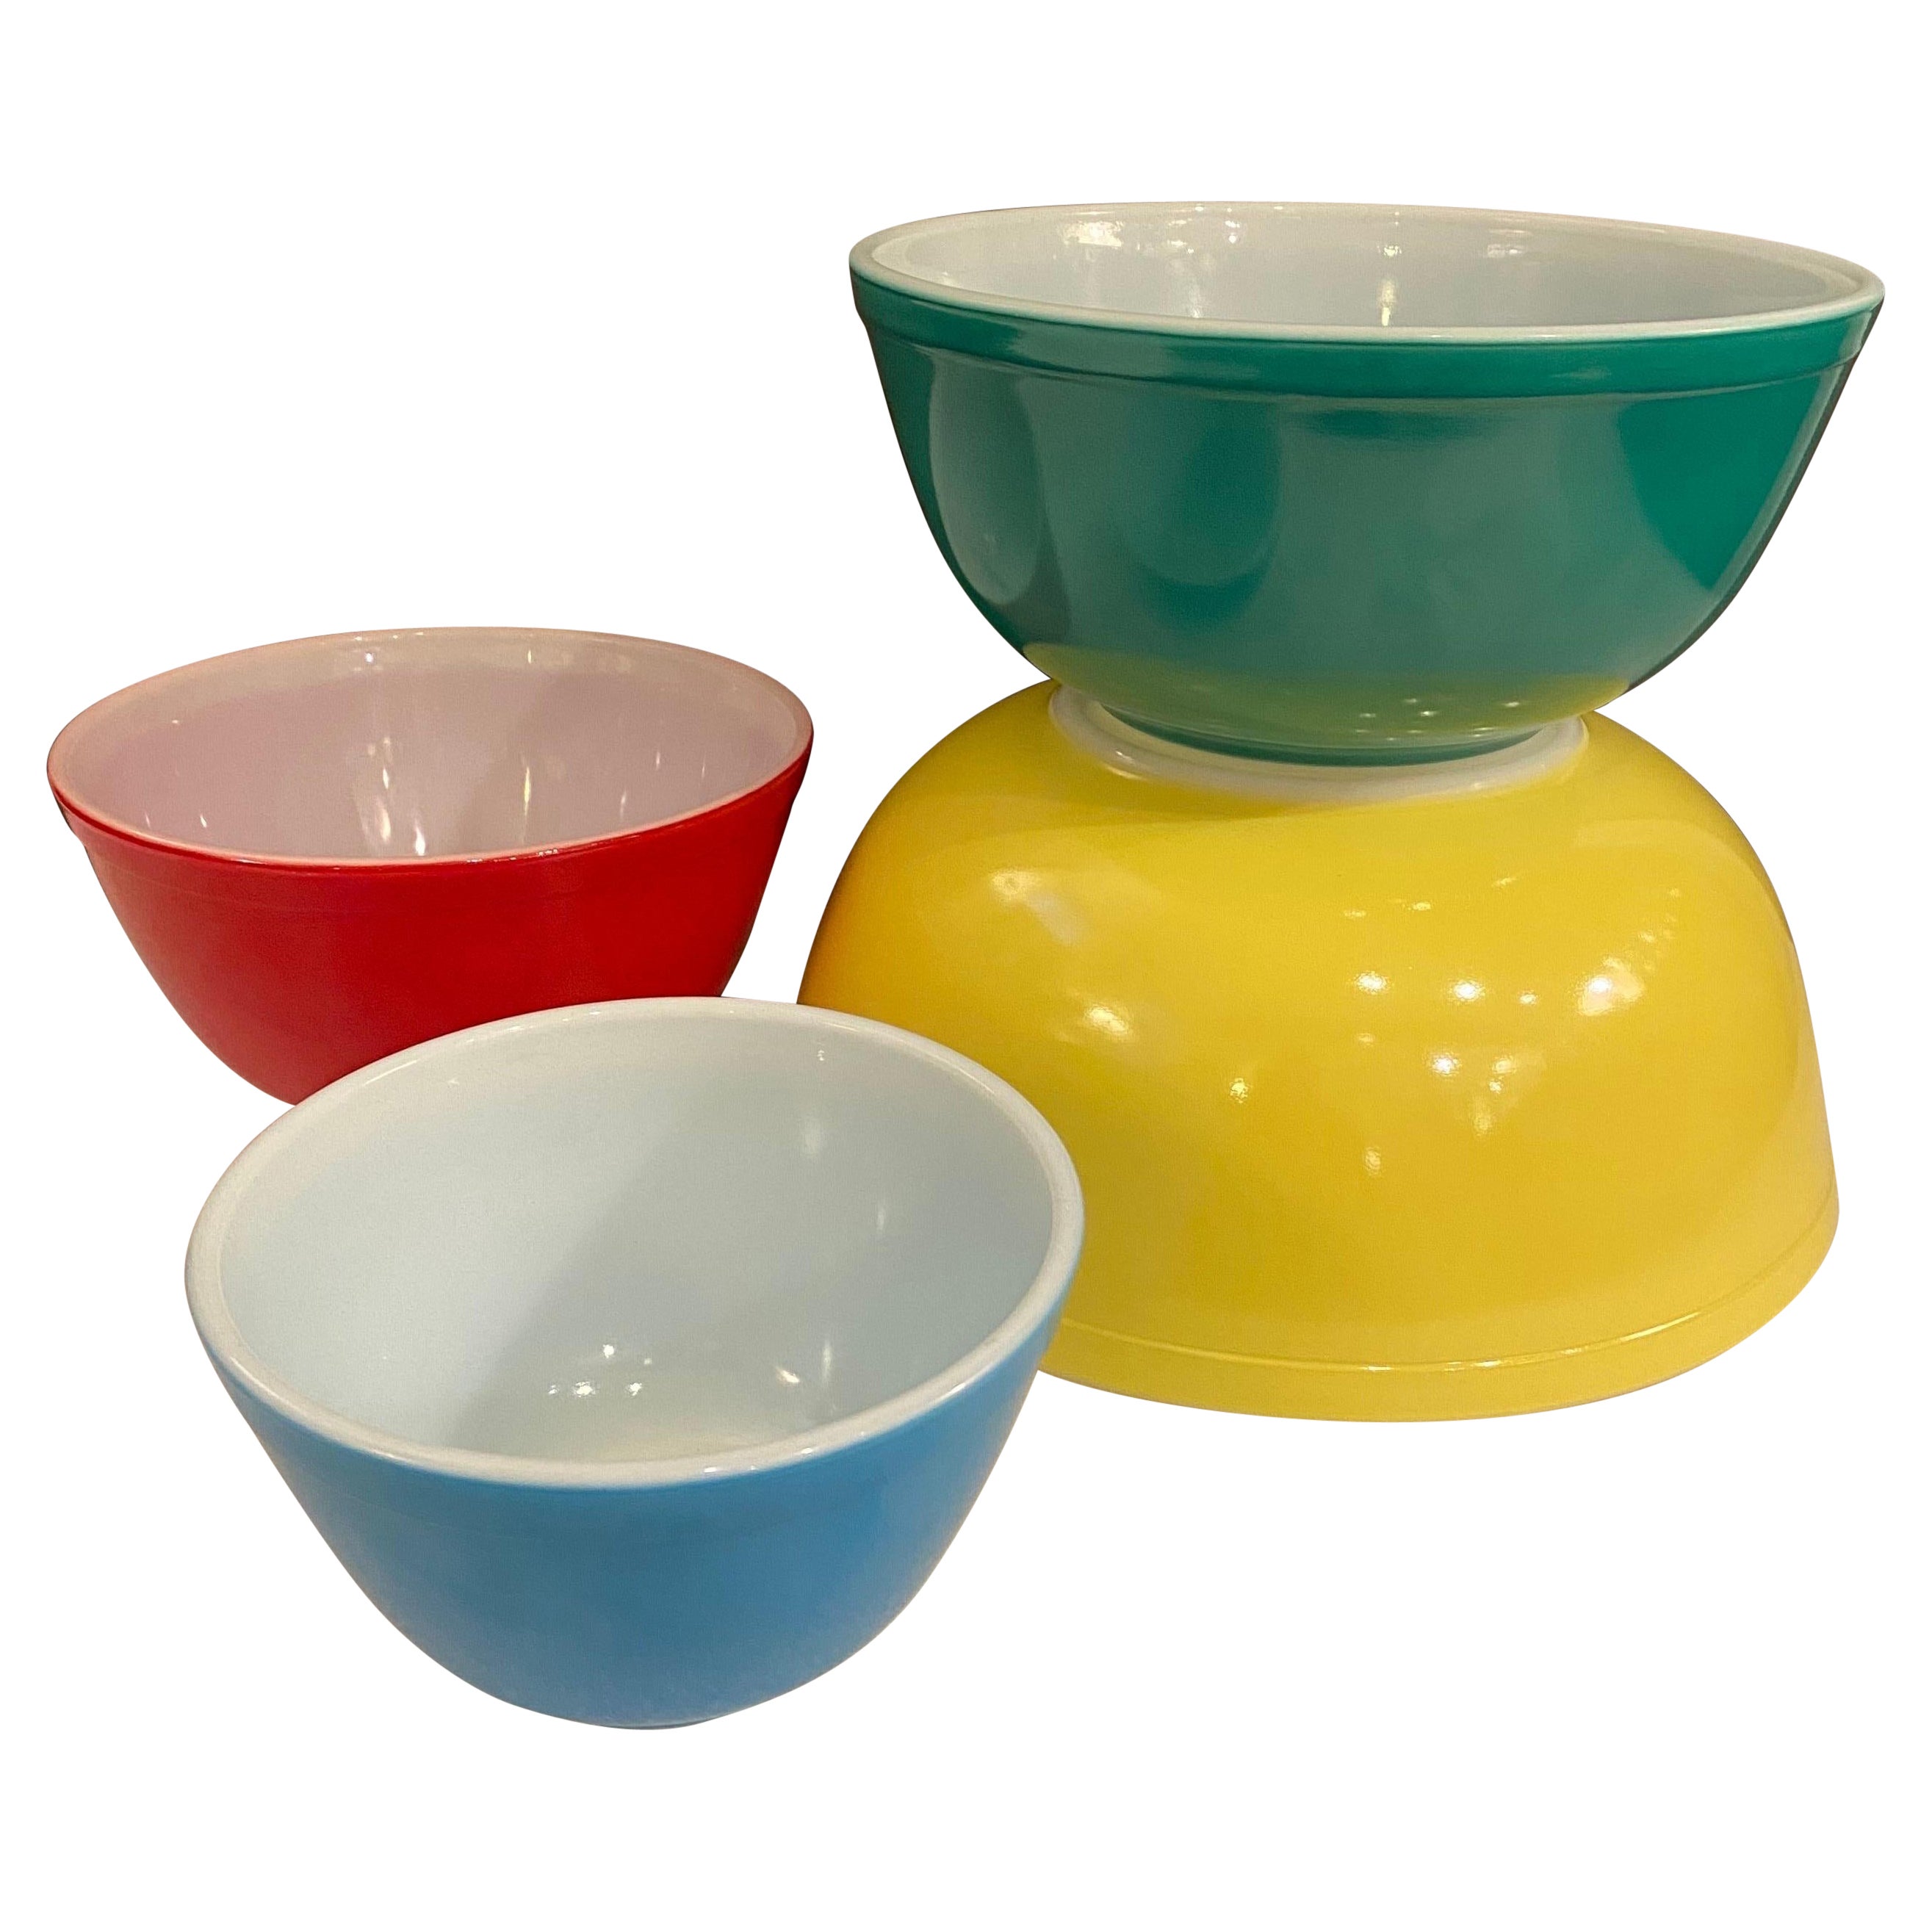 New Old Stock Pyrex Primary Color Bowl Set